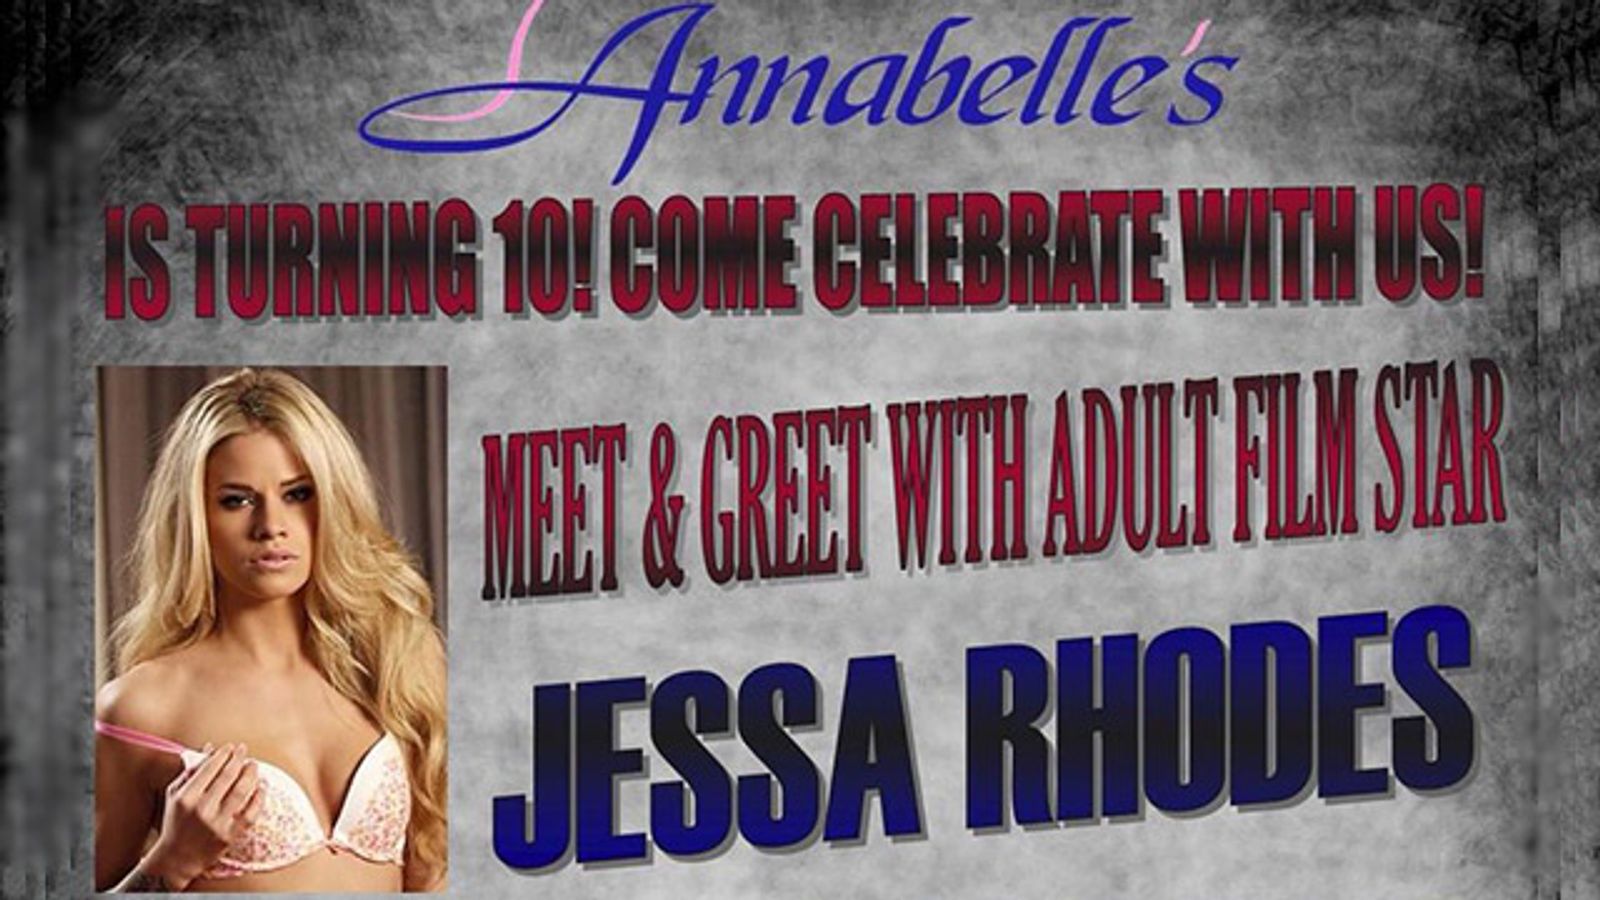 Jessa Rhodes to Sign at Stores in Sioux Falls This Weekend